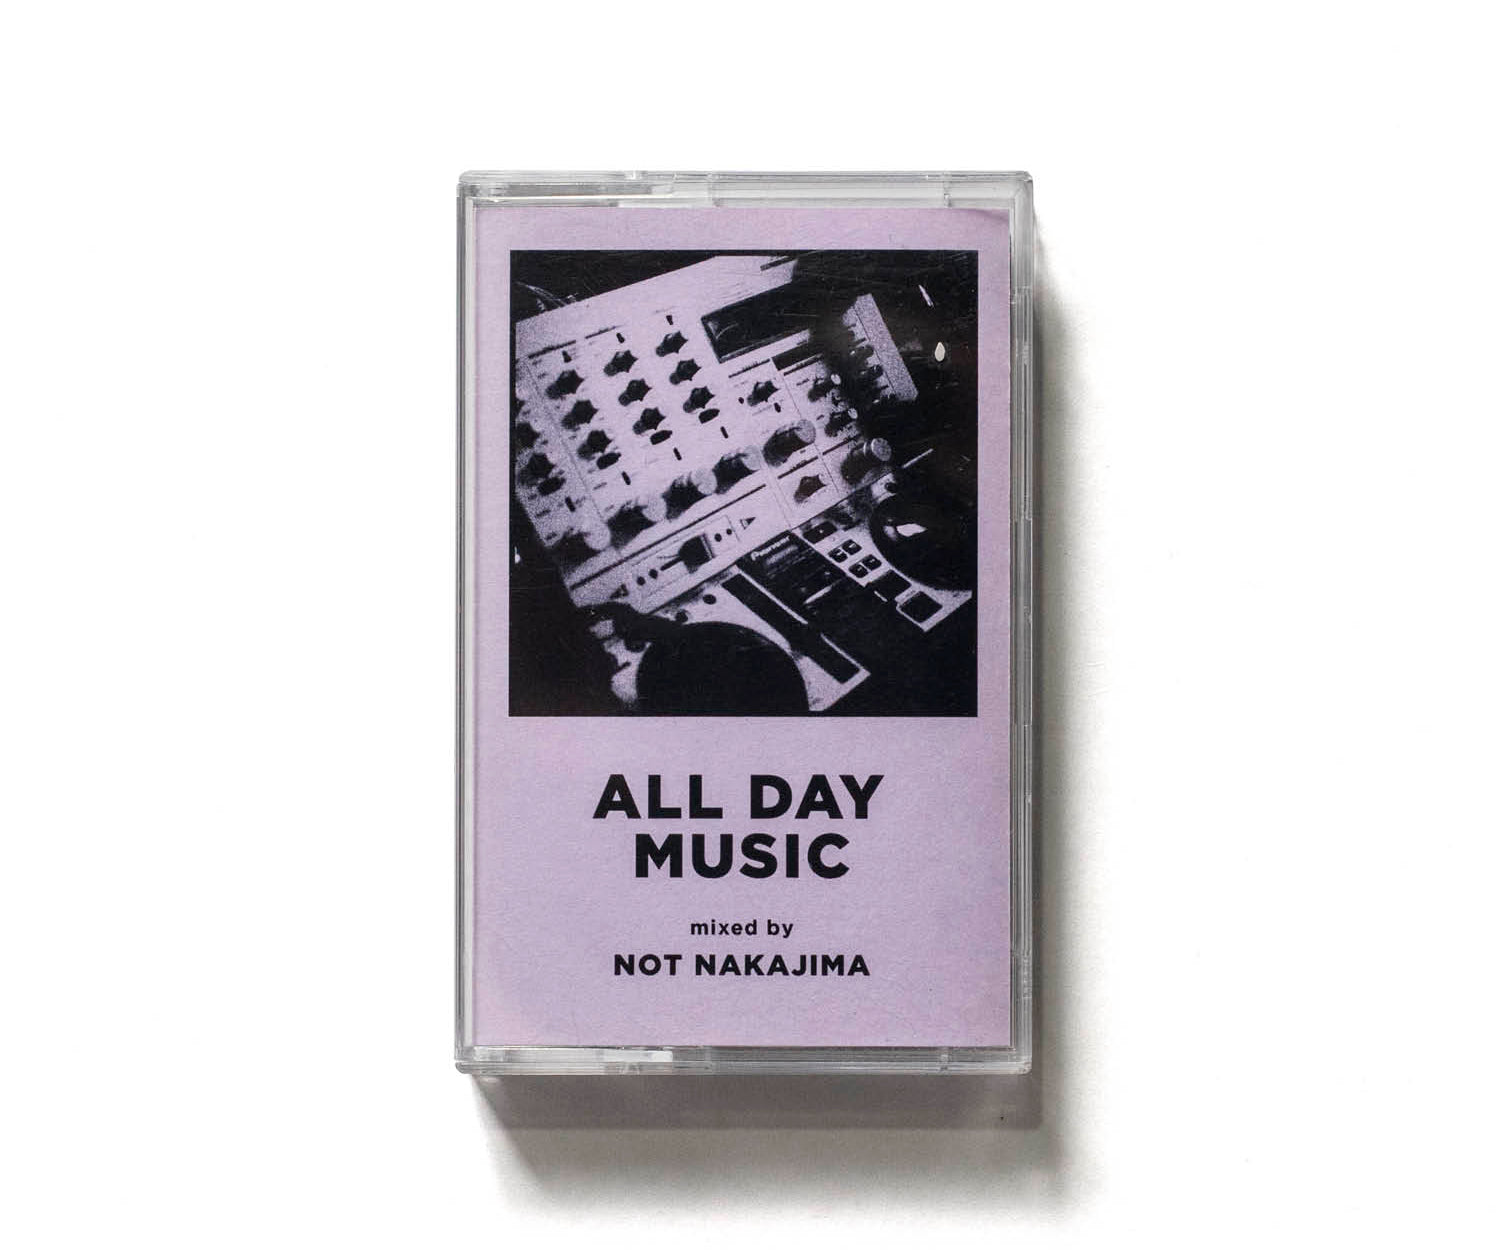 A.D.M. #2 - Mixed by NOT NAKAJIMA | LIKE THIS SHOP